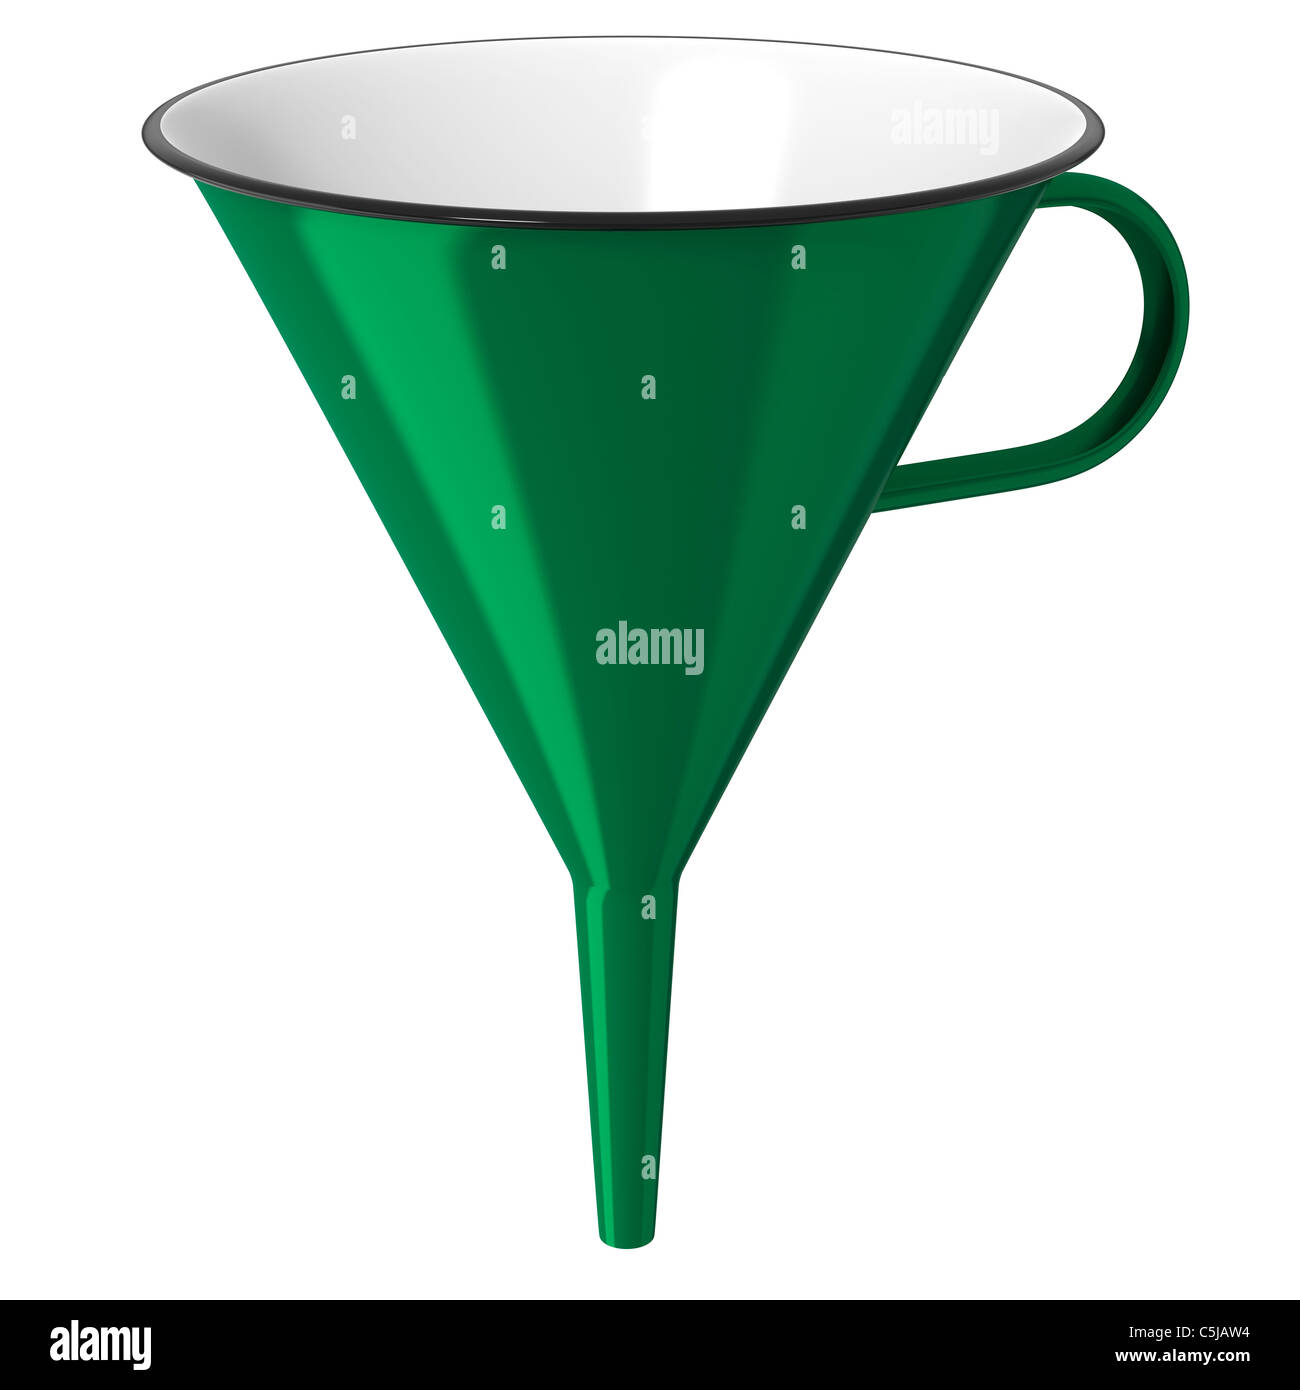 Green enamel funnel or cone isolated on white background Stock Photo